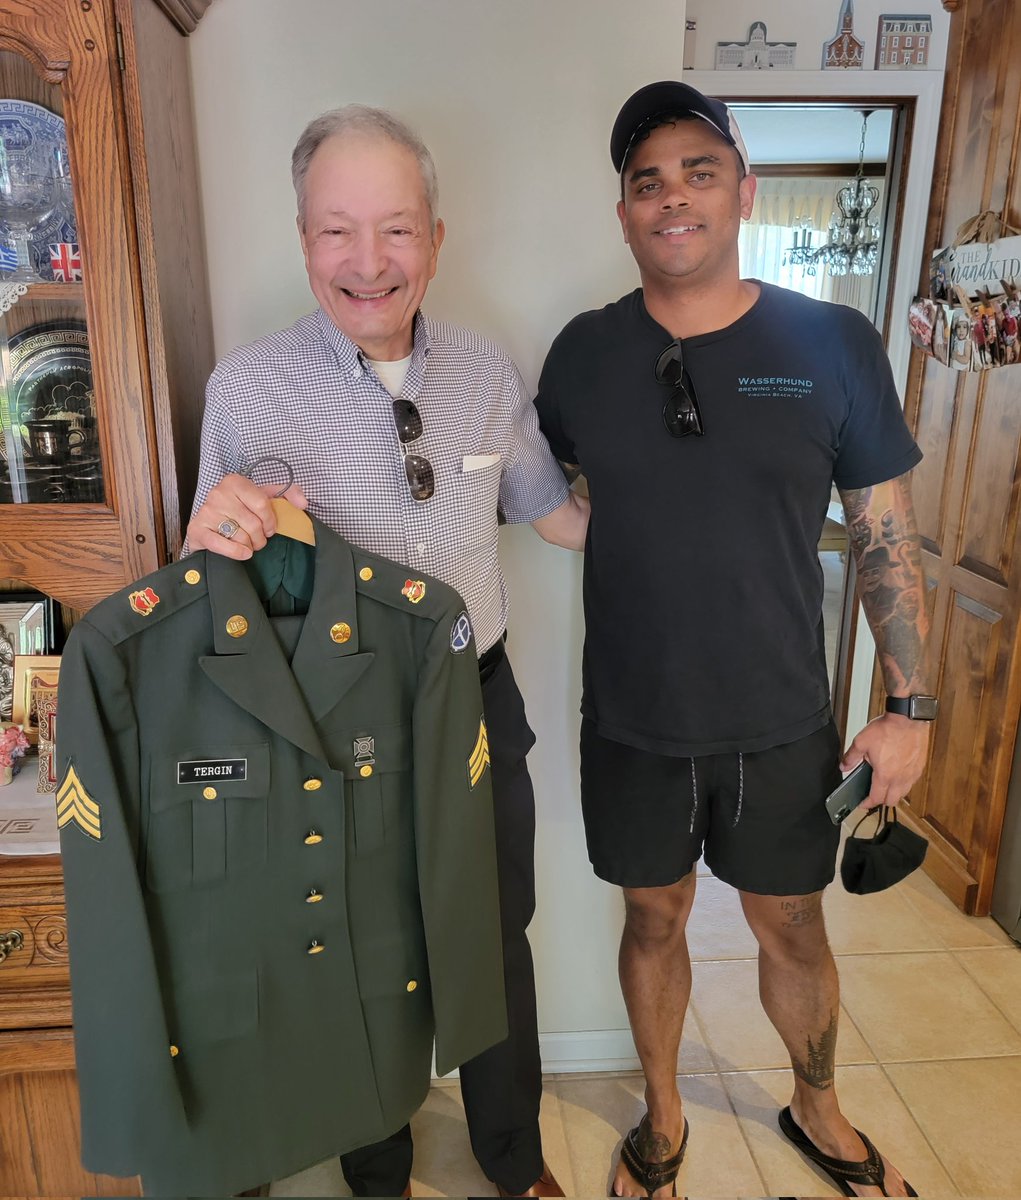 #DadTergin had a chance to visit with #USSJeffersonCity crew member Darren who had extra time before his flight back to Guam. Dad had fun showing his uniform from the @USArmy. 🇺🇲🇺🇲🇺🇲🇺🇲